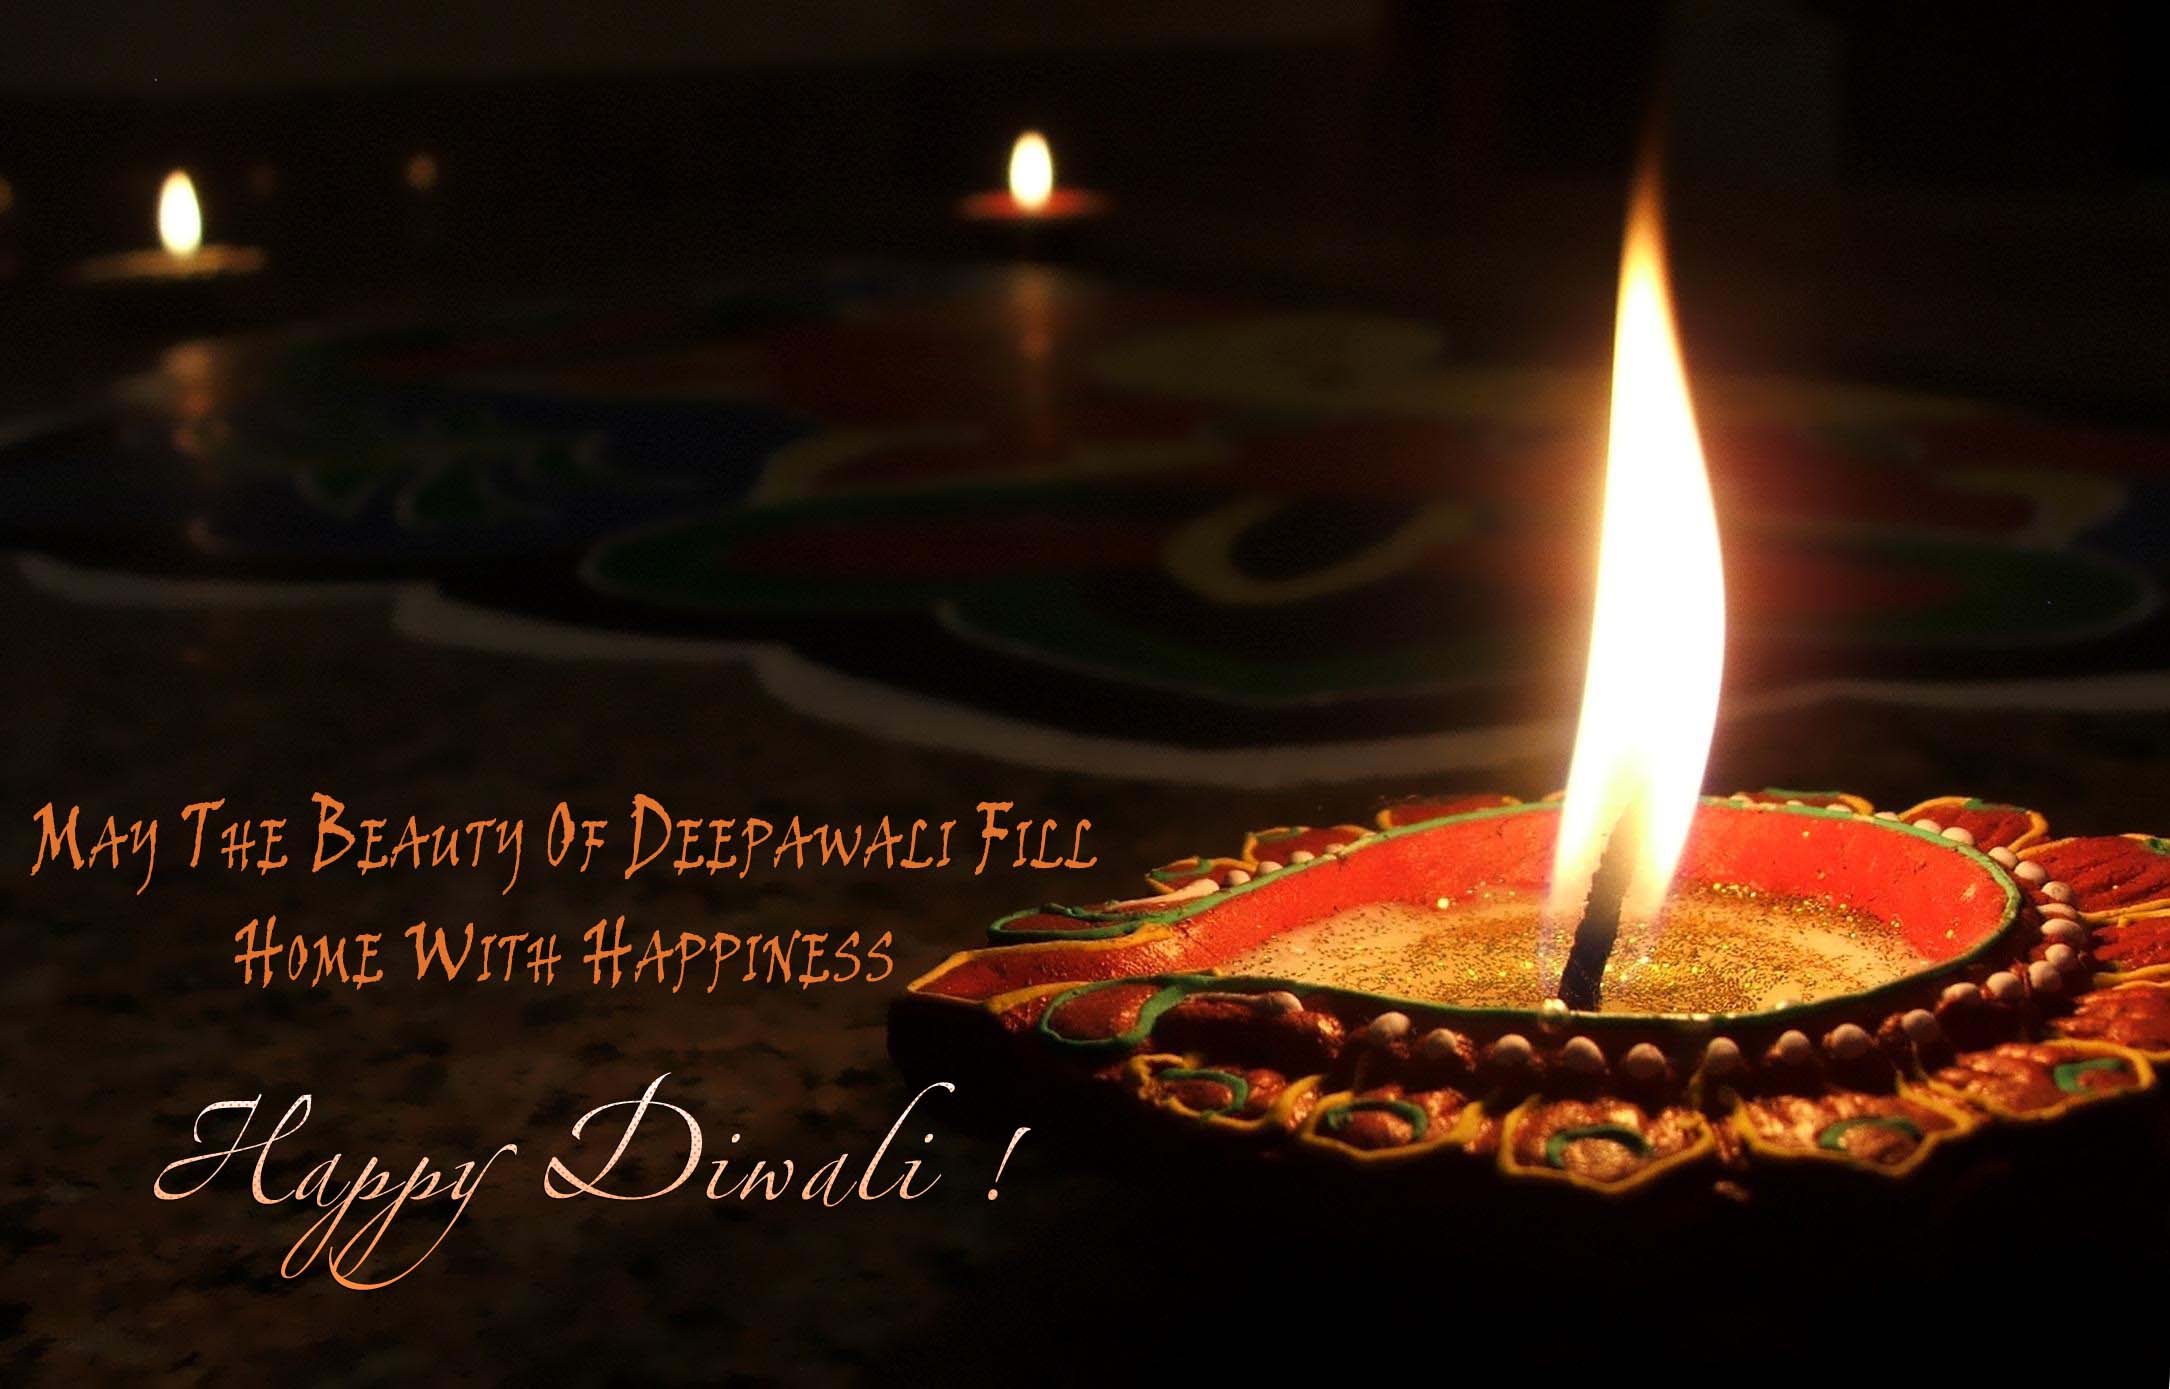 Happy Diwali Festival Greetings Free Images And Photos - Happy Diwali Images 2019 In Hindi , HD Wallpaper & Backgrounds